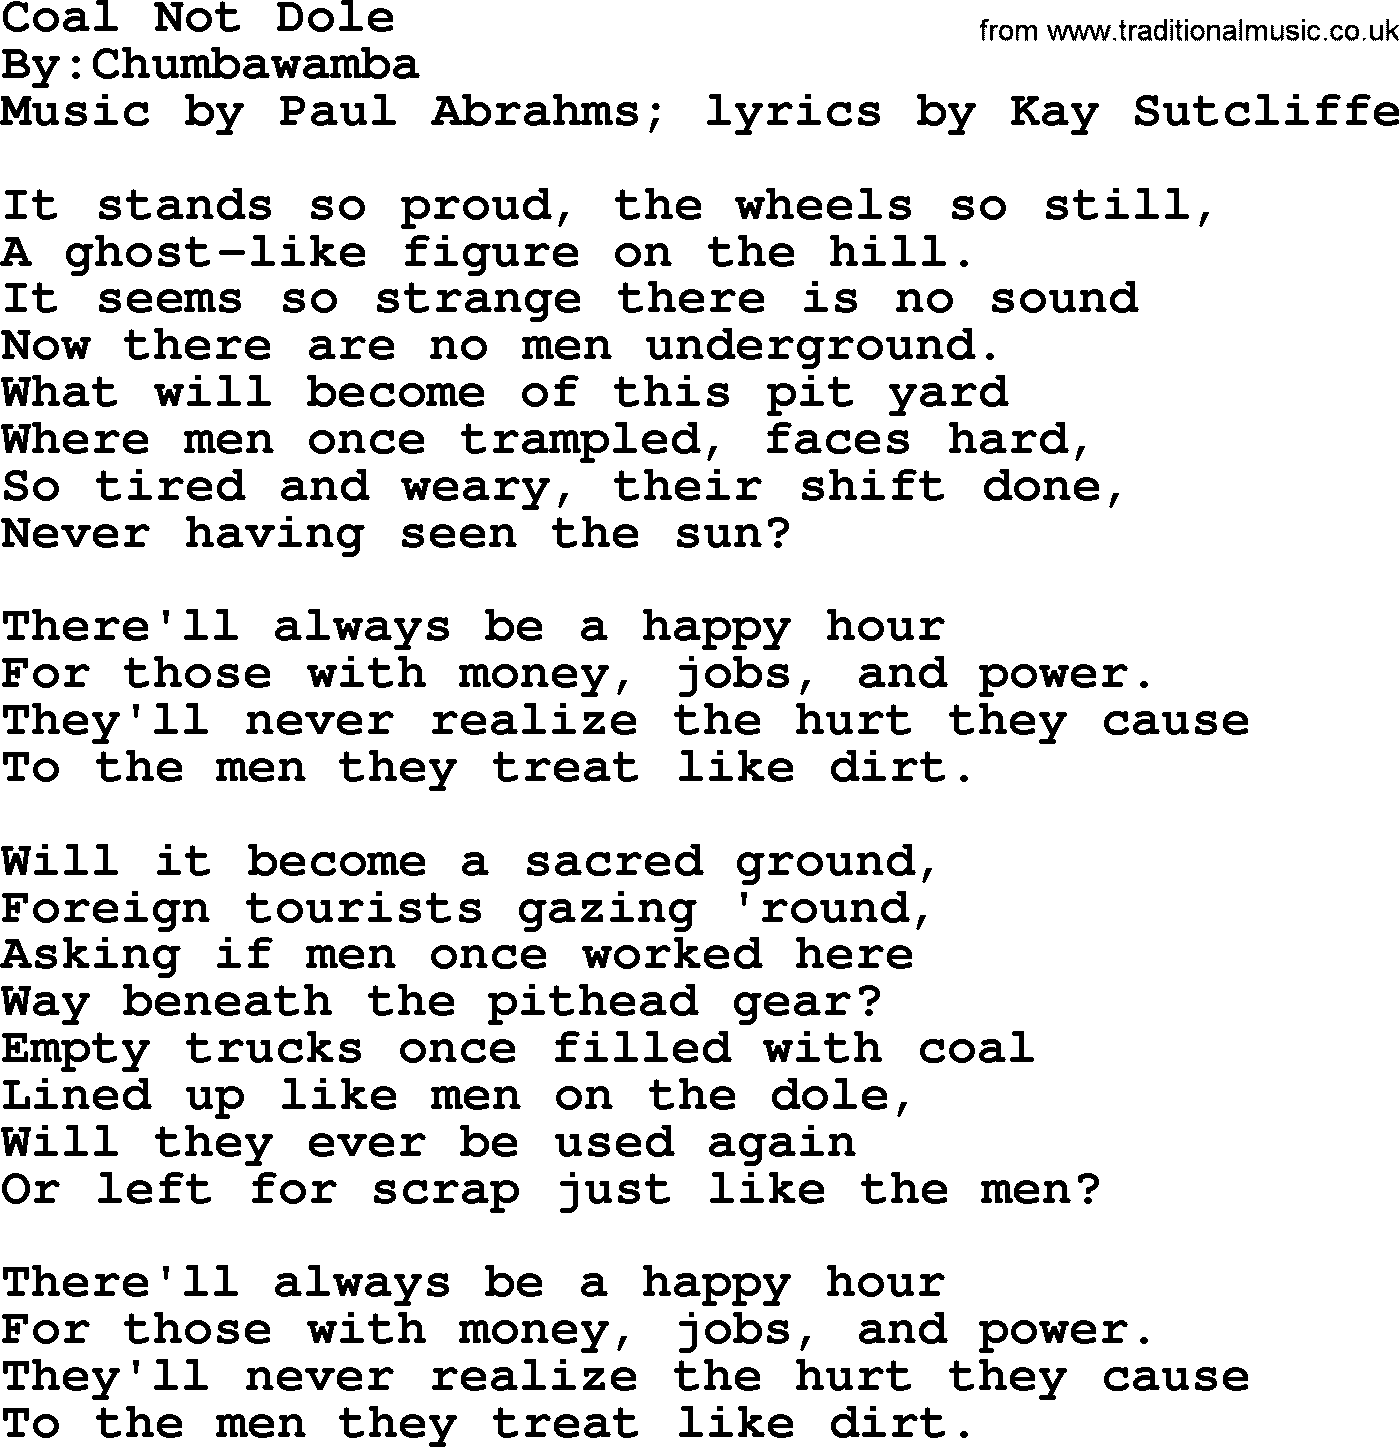 Political, Solidarity, Workers or Union song: Coal Not Dole, lyrics